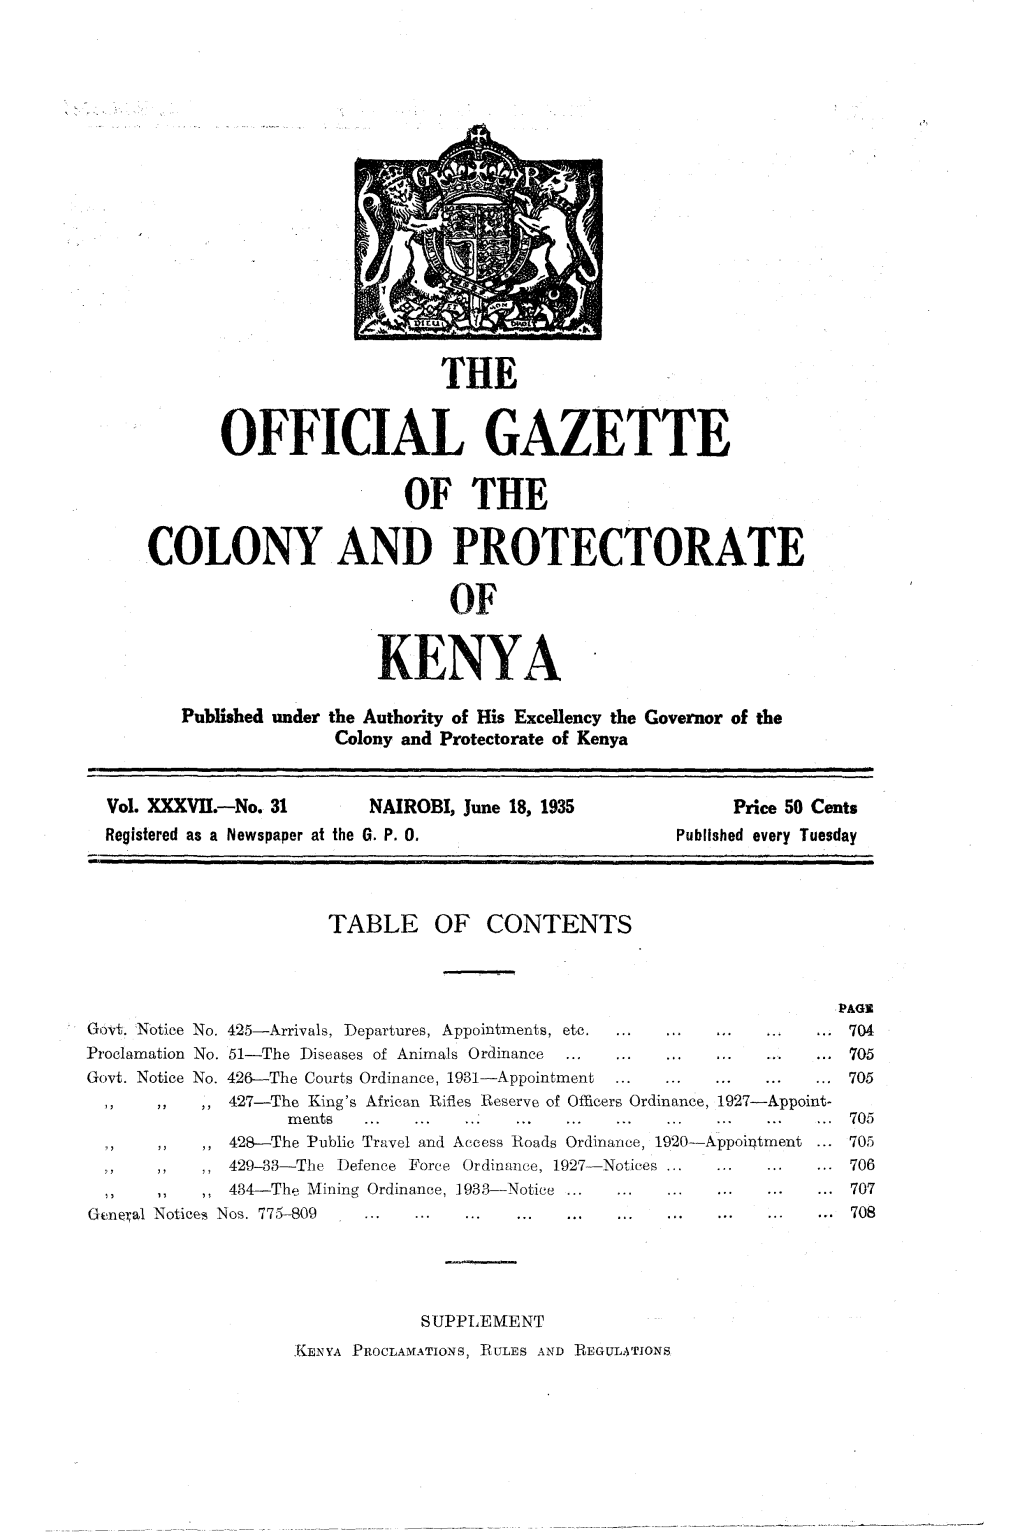 Al Gazette of the Colony and Protectorate